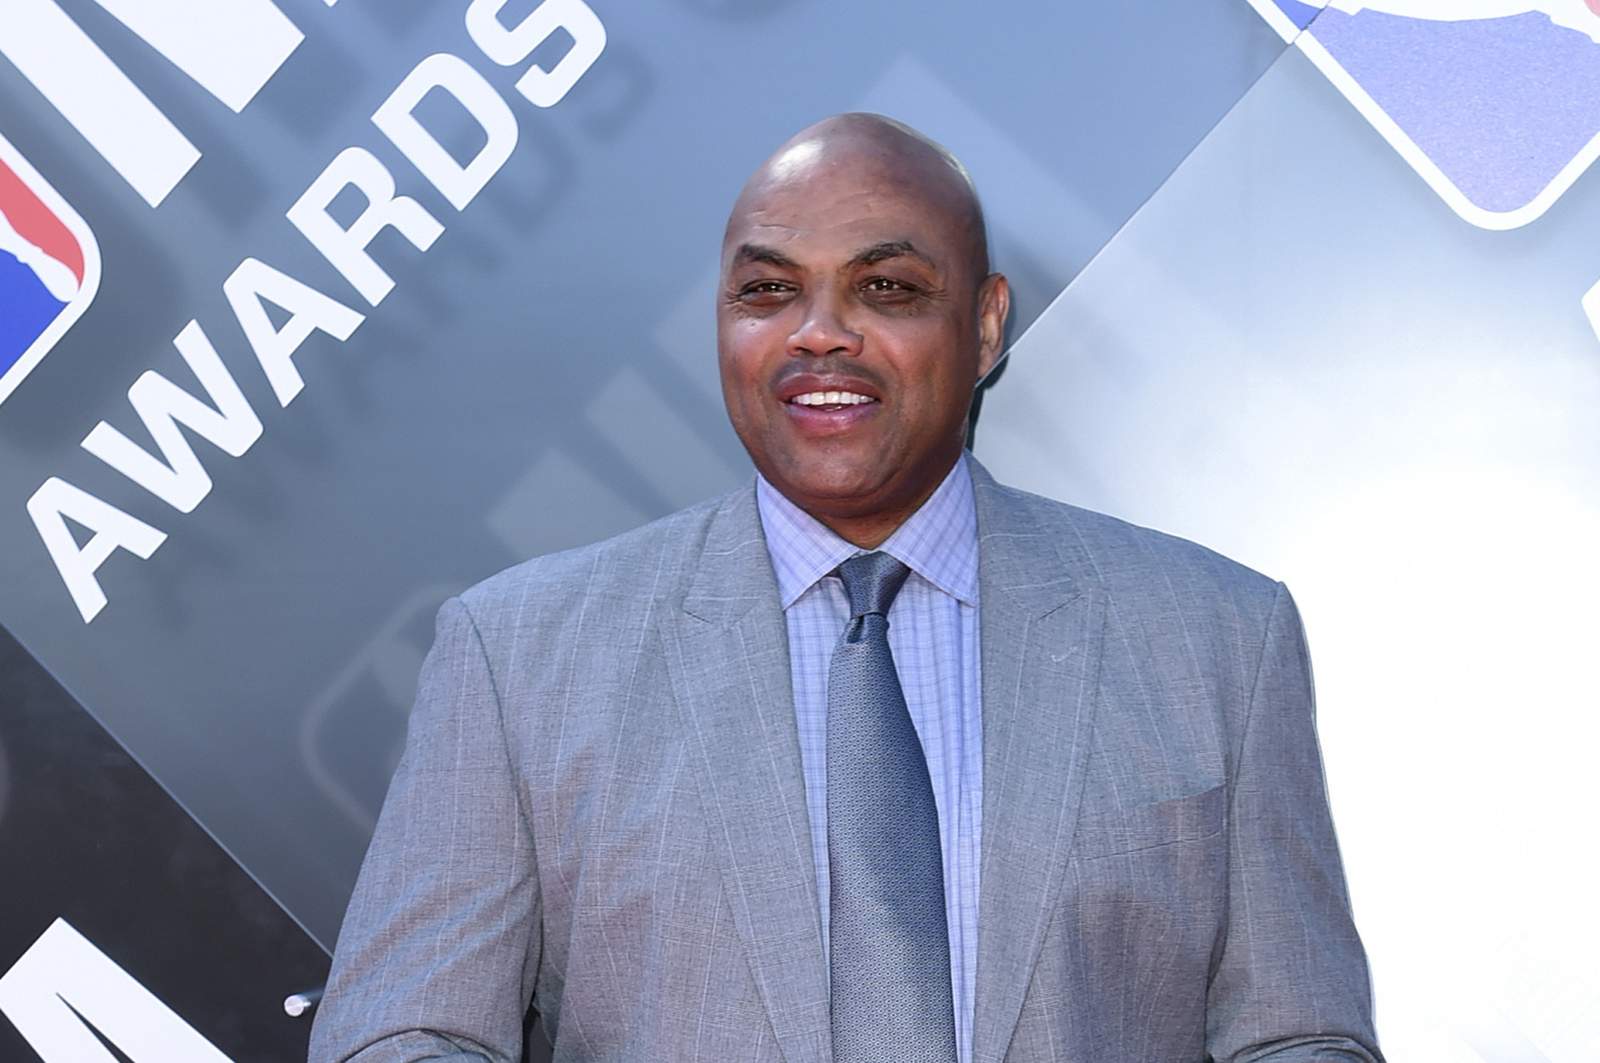 CHARLES BARKLEY RELEASES PUBLIC SERVICE ANNOUNCEMENT FOR SOS COUNCIL: “WE HAVE WHAT WE NEED TO SAVE OURSELVES”